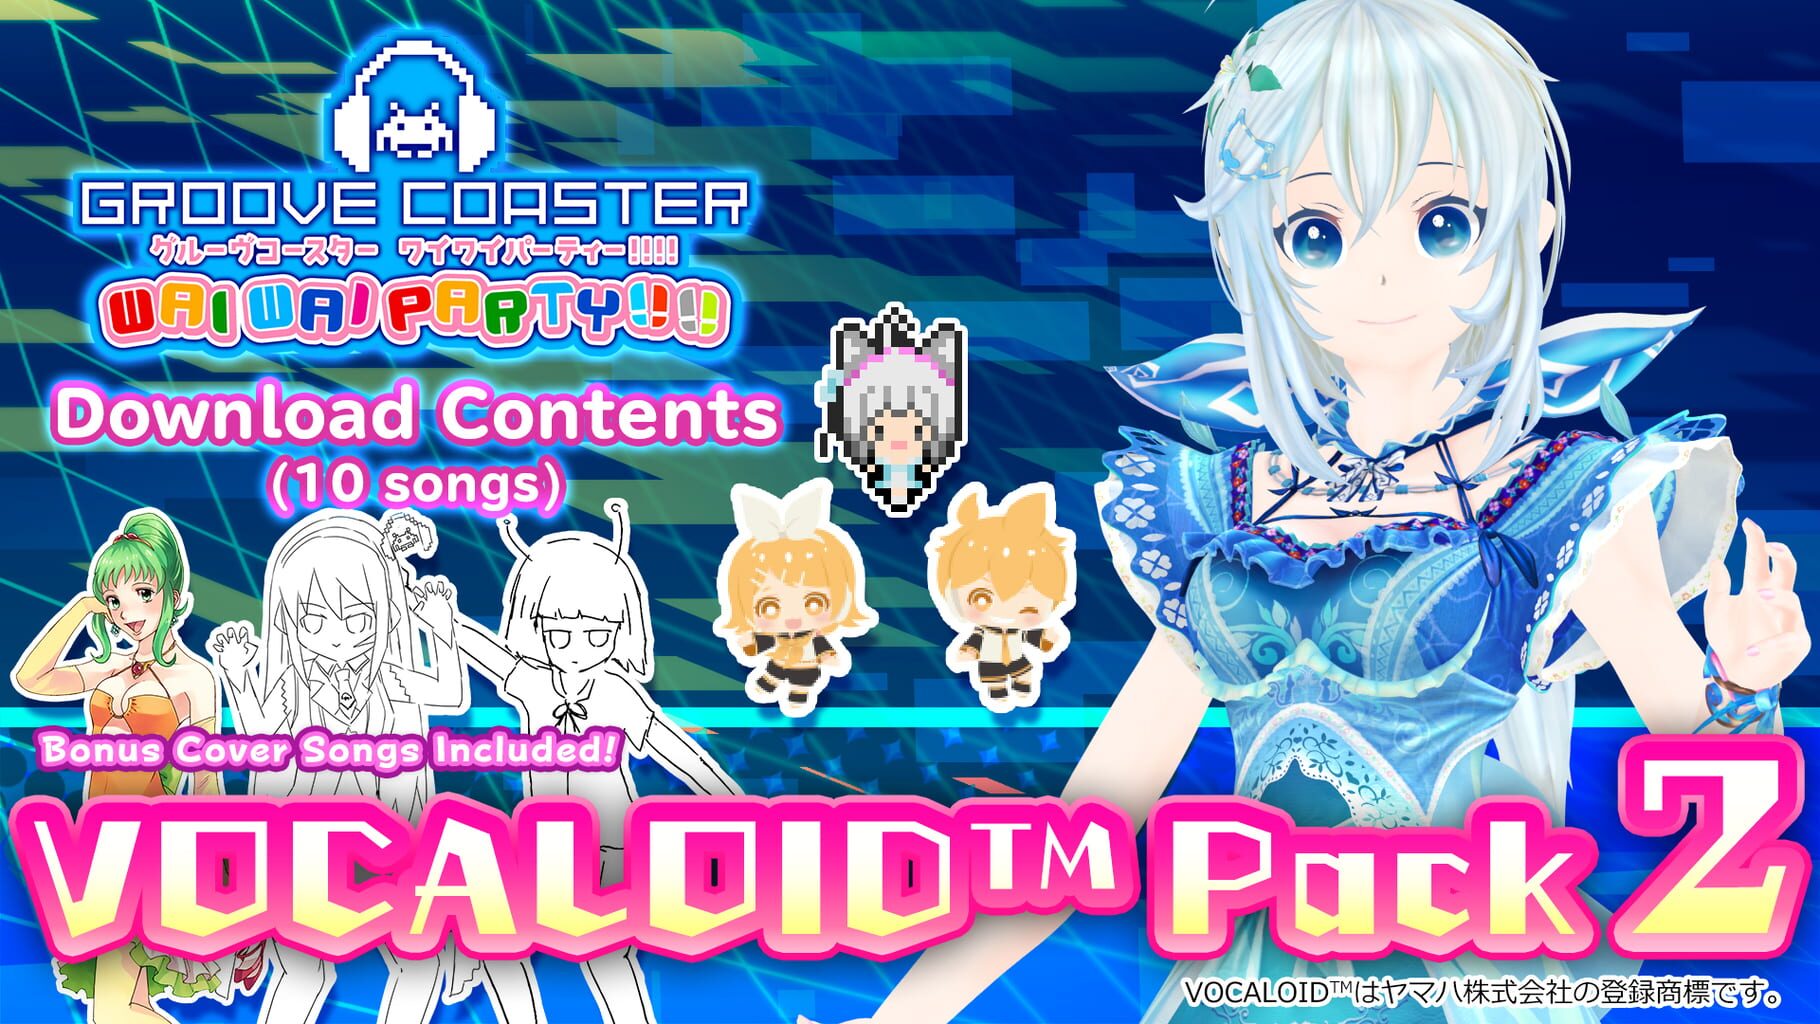 Groove Coaster: Wai Wai Party!!!! - Vocaloid Pack 2 artwork